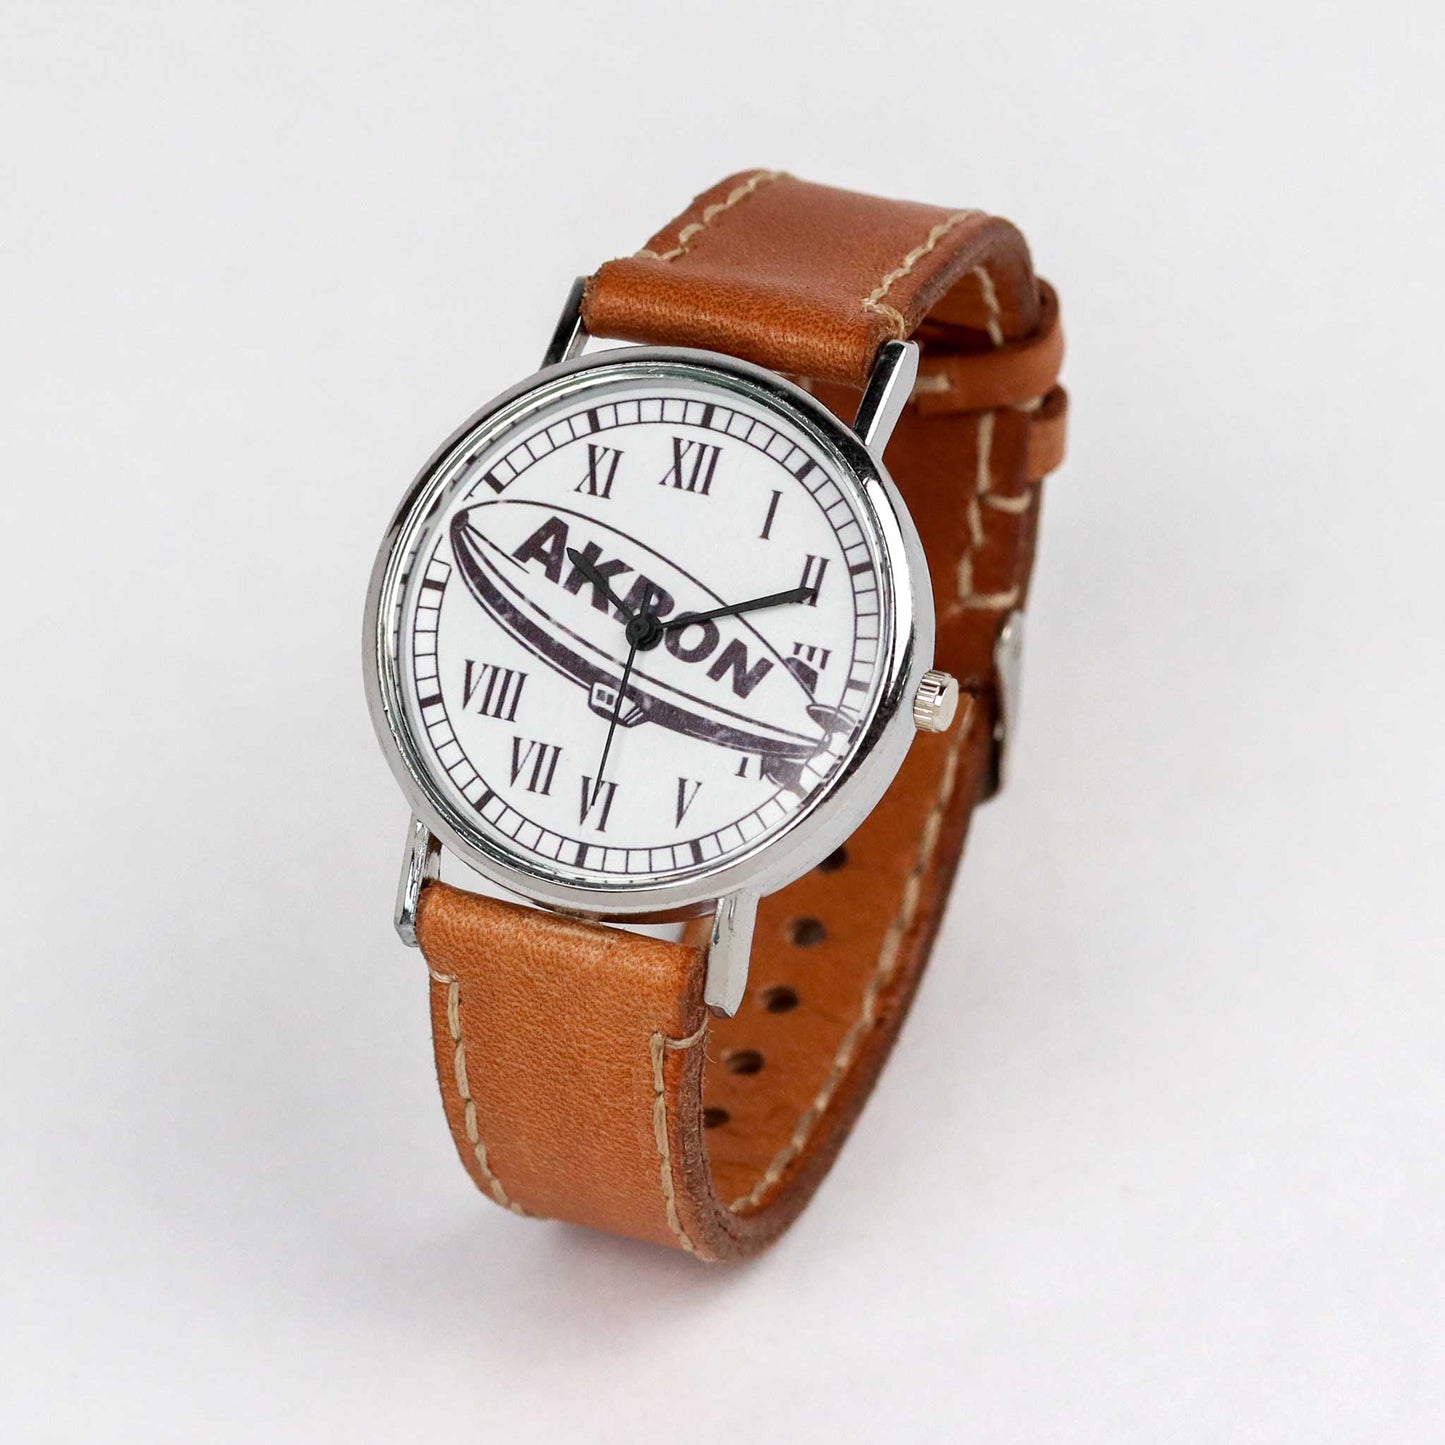 side view of an akron wrist watch with brown strap